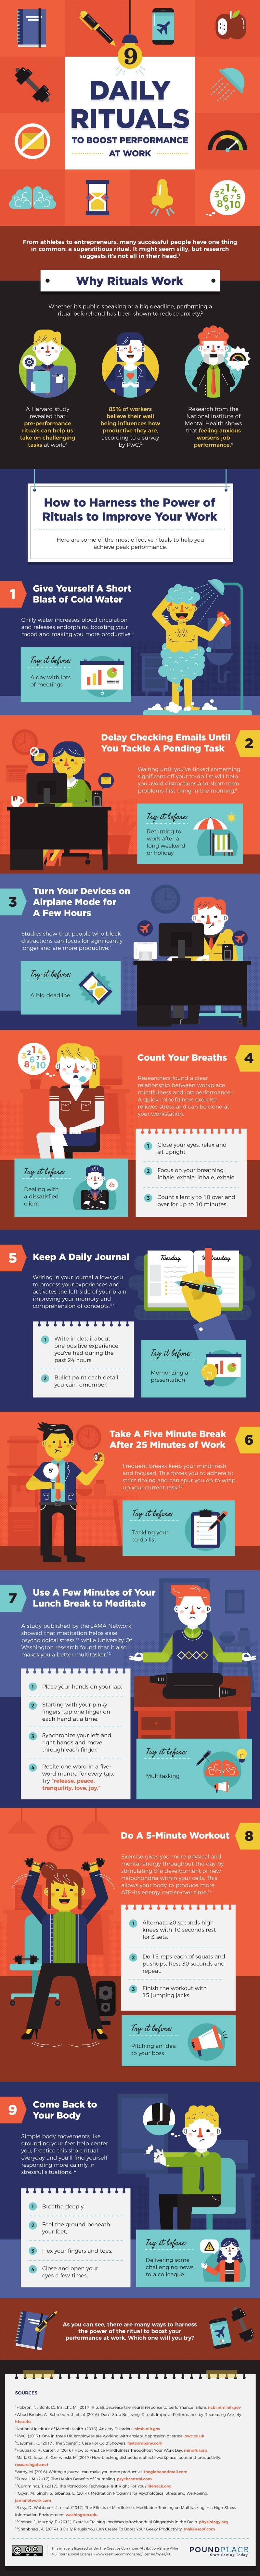 9 Daily Rituals To Boost Performance At Work #infographic